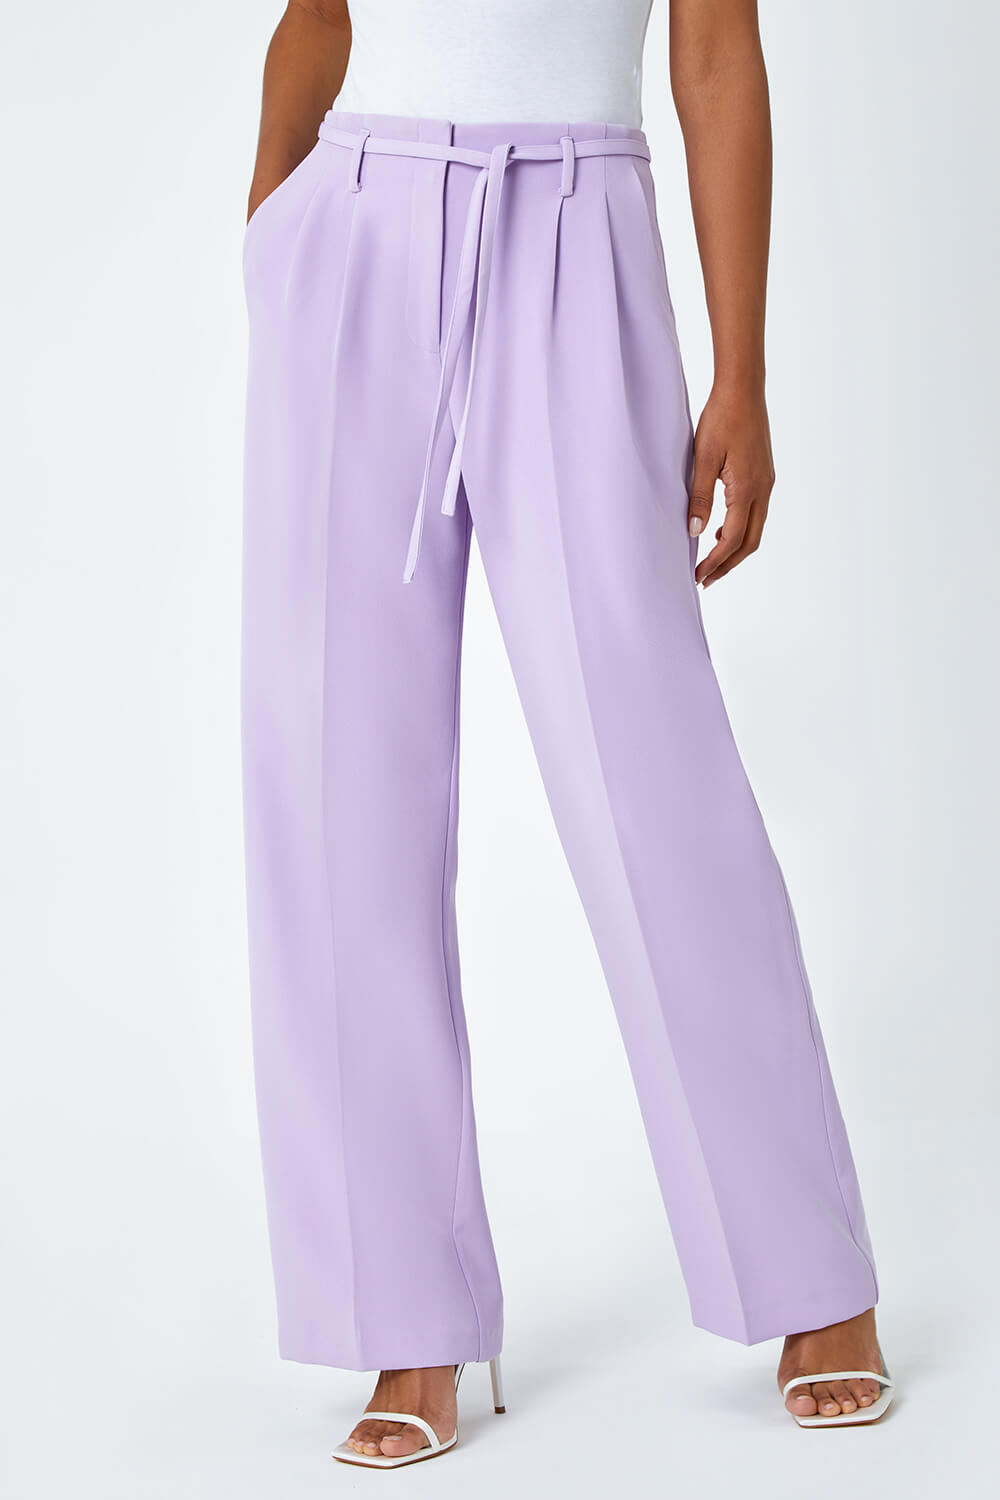 Lilac Crepe Stretch Straight Leg Trousers, Image 4 of 6